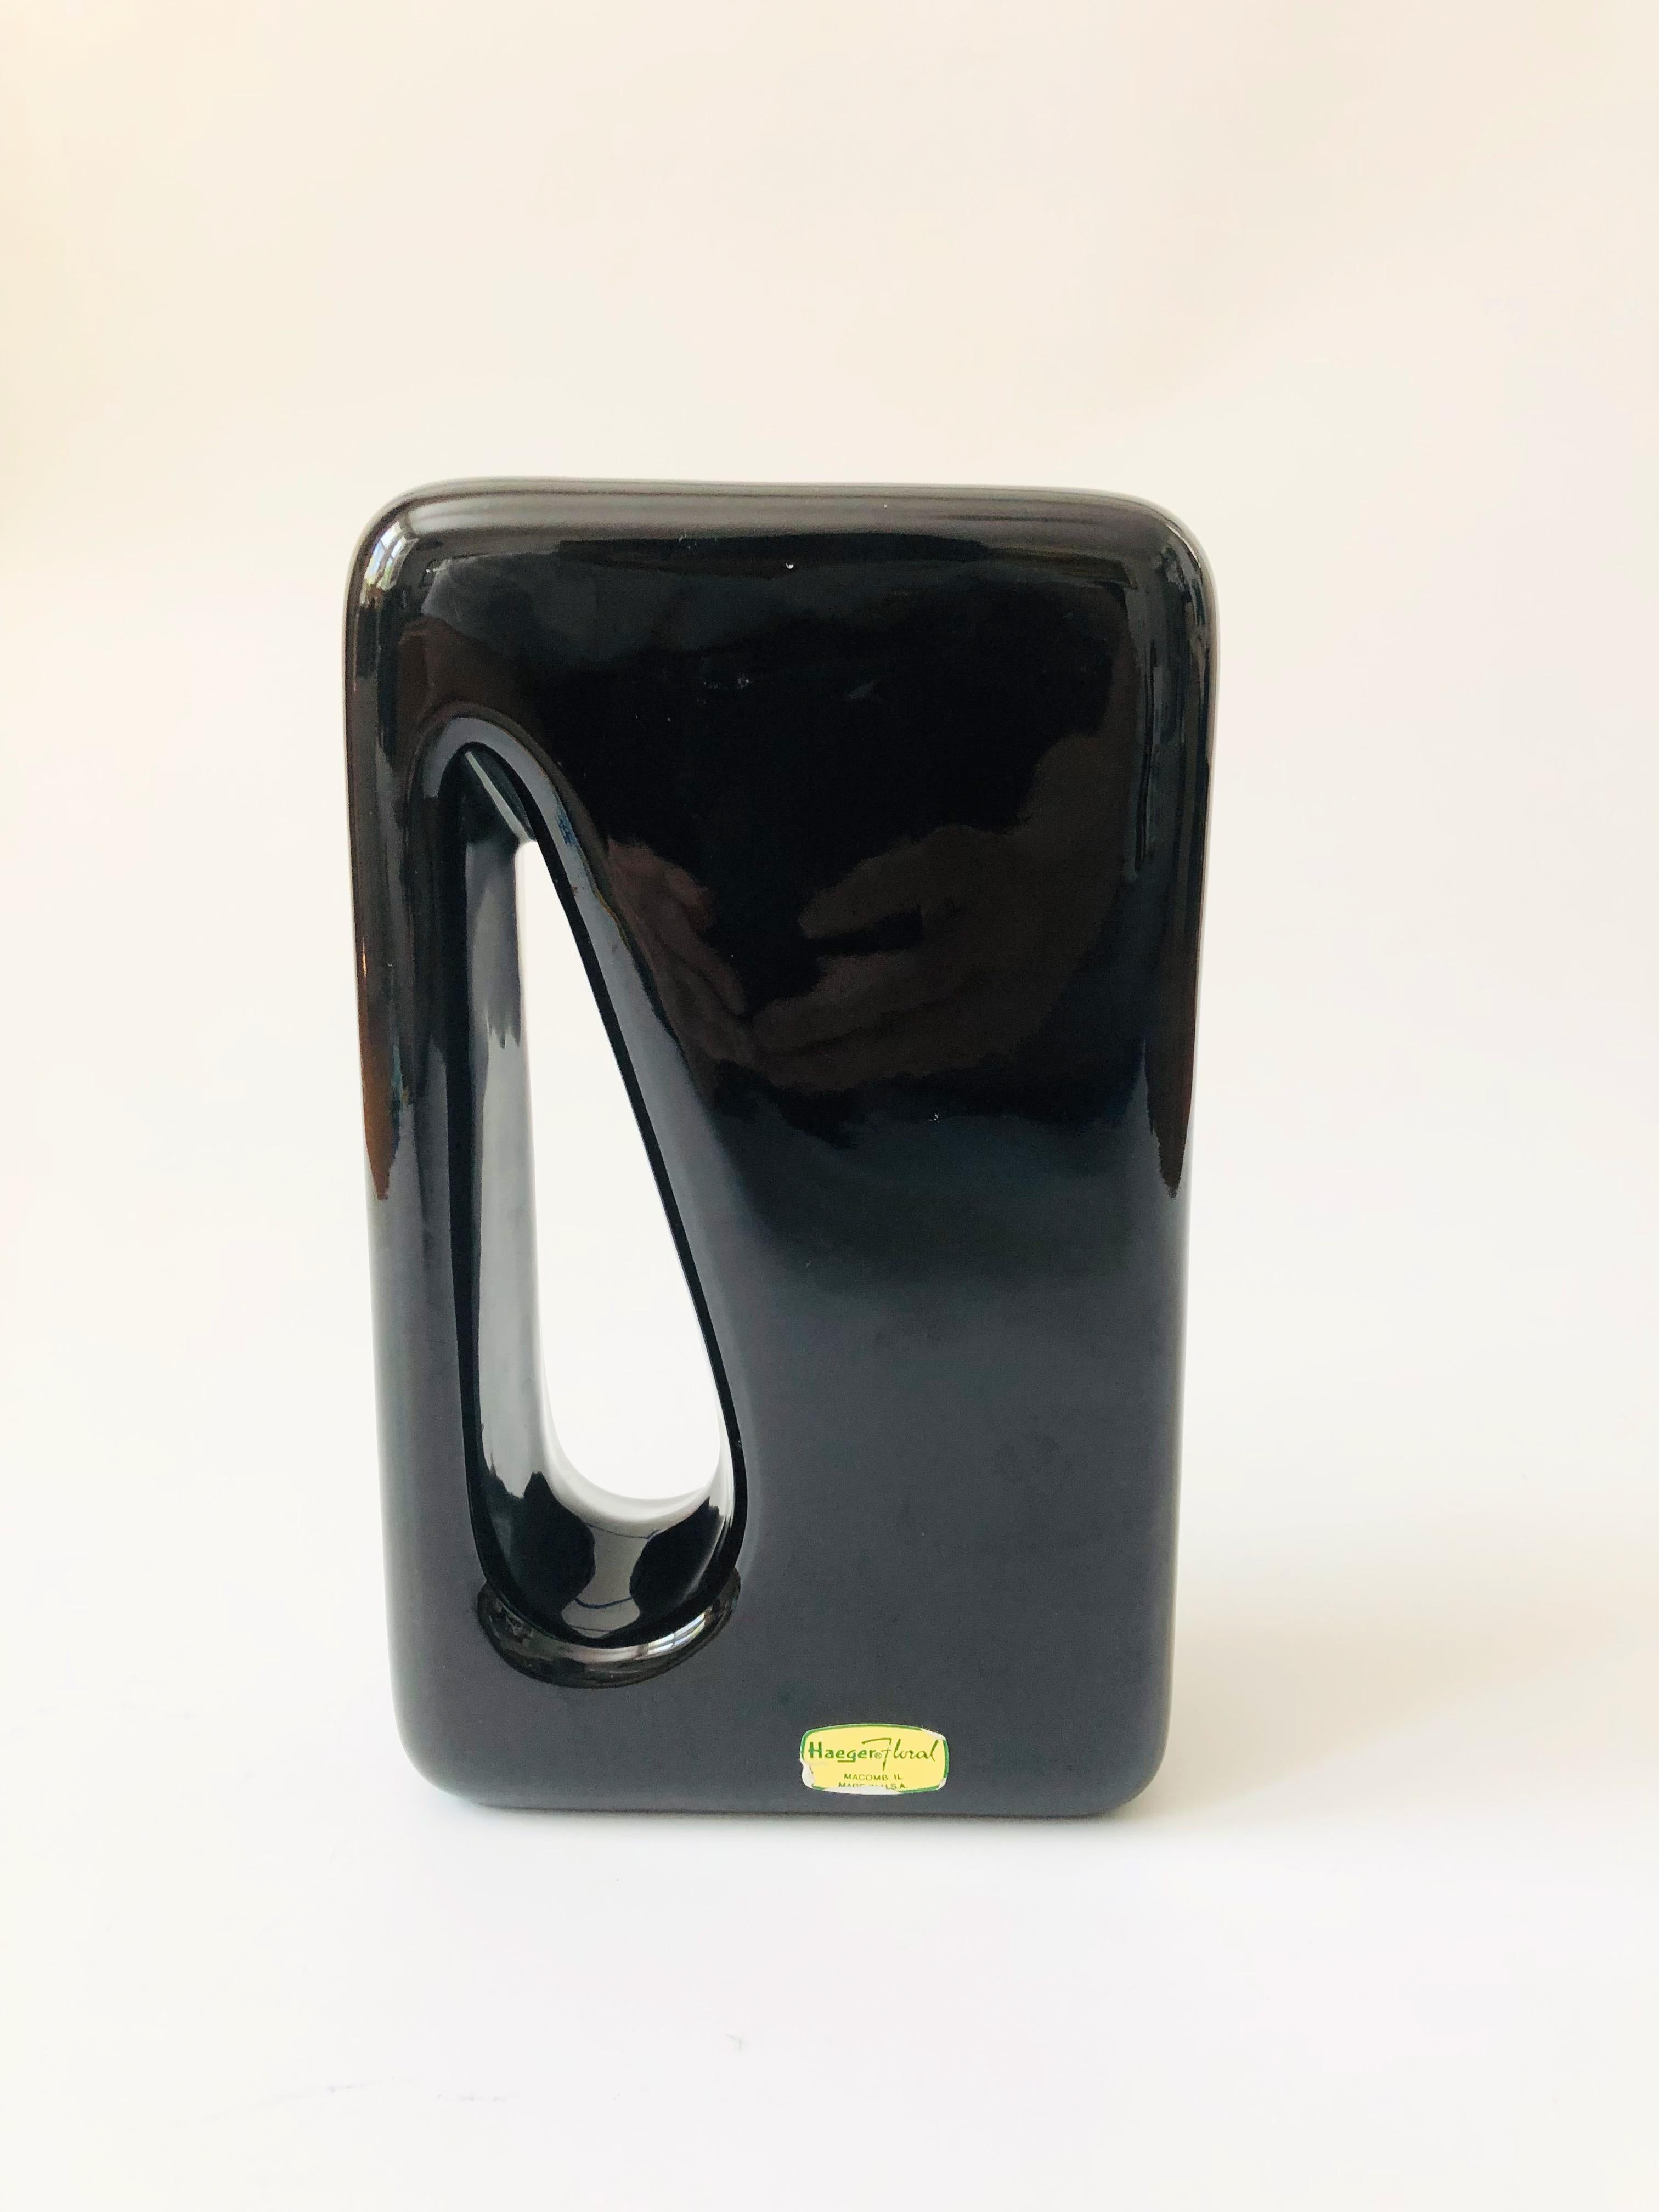 A vintage 1980s ceramic vase by Haeger. Rectangular shape with a cutout design on one side. Finished in a glossy black glaze. A great sculptural accent piece.
 